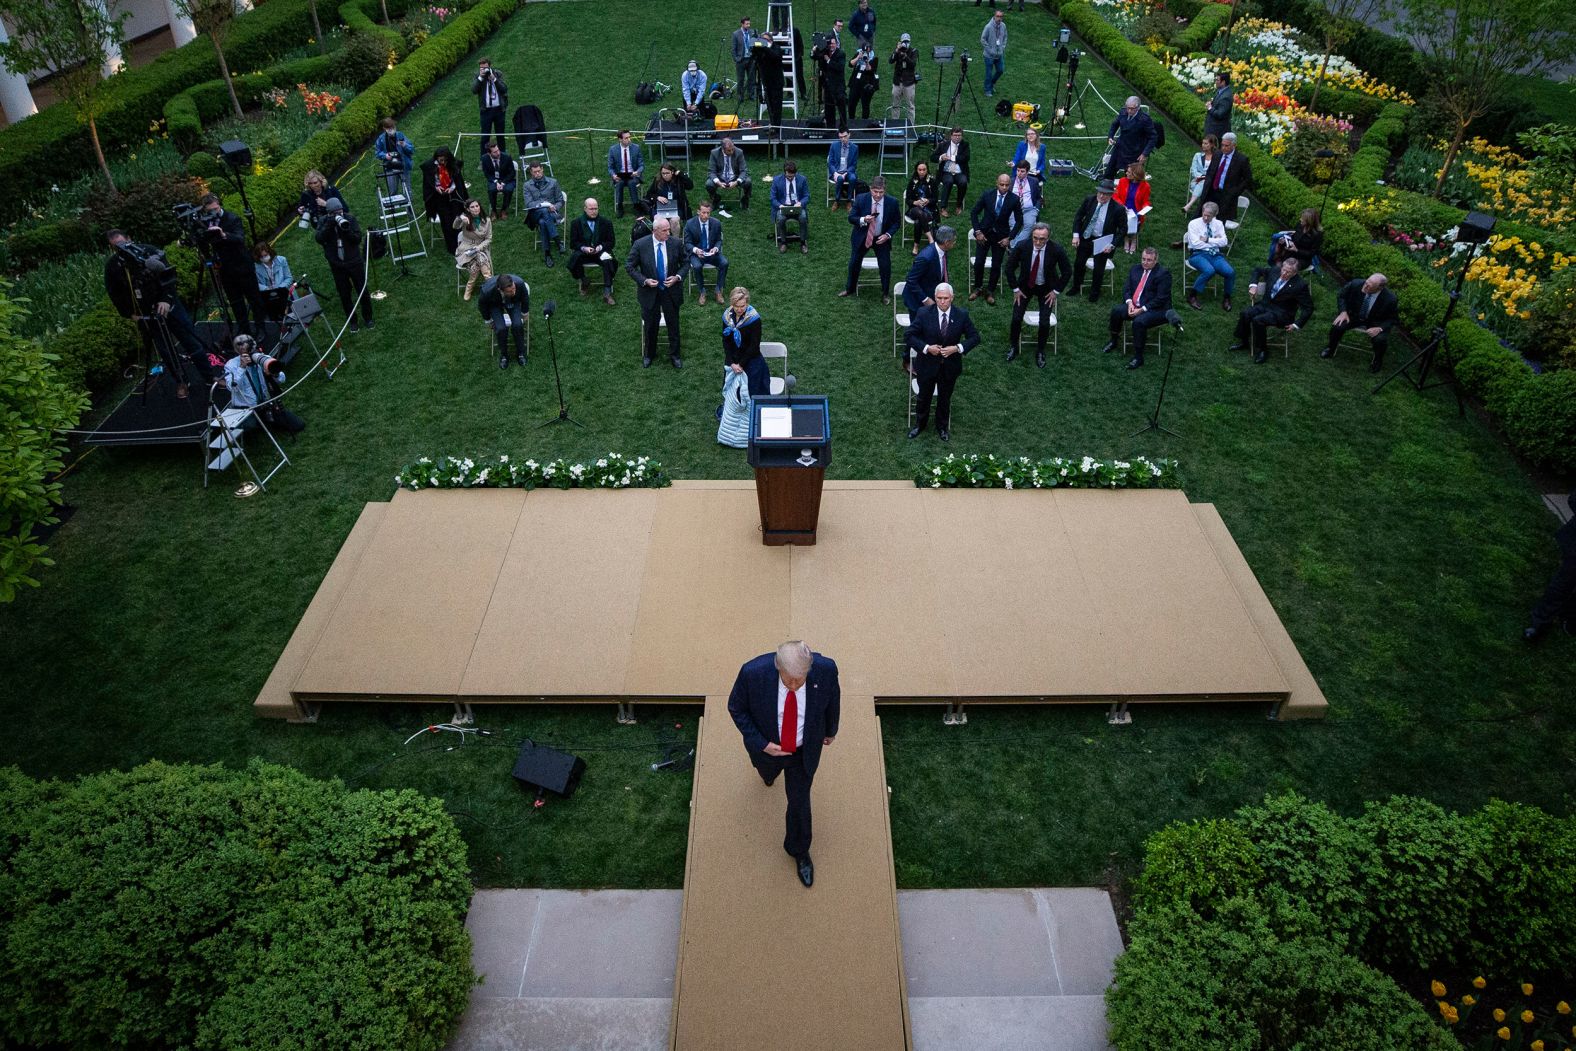 Trump departs from the White House Rose Garden following the coronavirus briefing on April 14. During the briefing, Trump threatened to leave after Playboy correspondent and CNN analyst Brian Karem attempted to ask a question about social distancing. "Quiet. Quiet." Trump said. When Karem continued to ask his question, Trump interjected: "If you keep talking, I'll leave and you can have it out with the rest of these people. If you keep talking, I'm going to leave and you can have it out with them. Just a loudmouth."